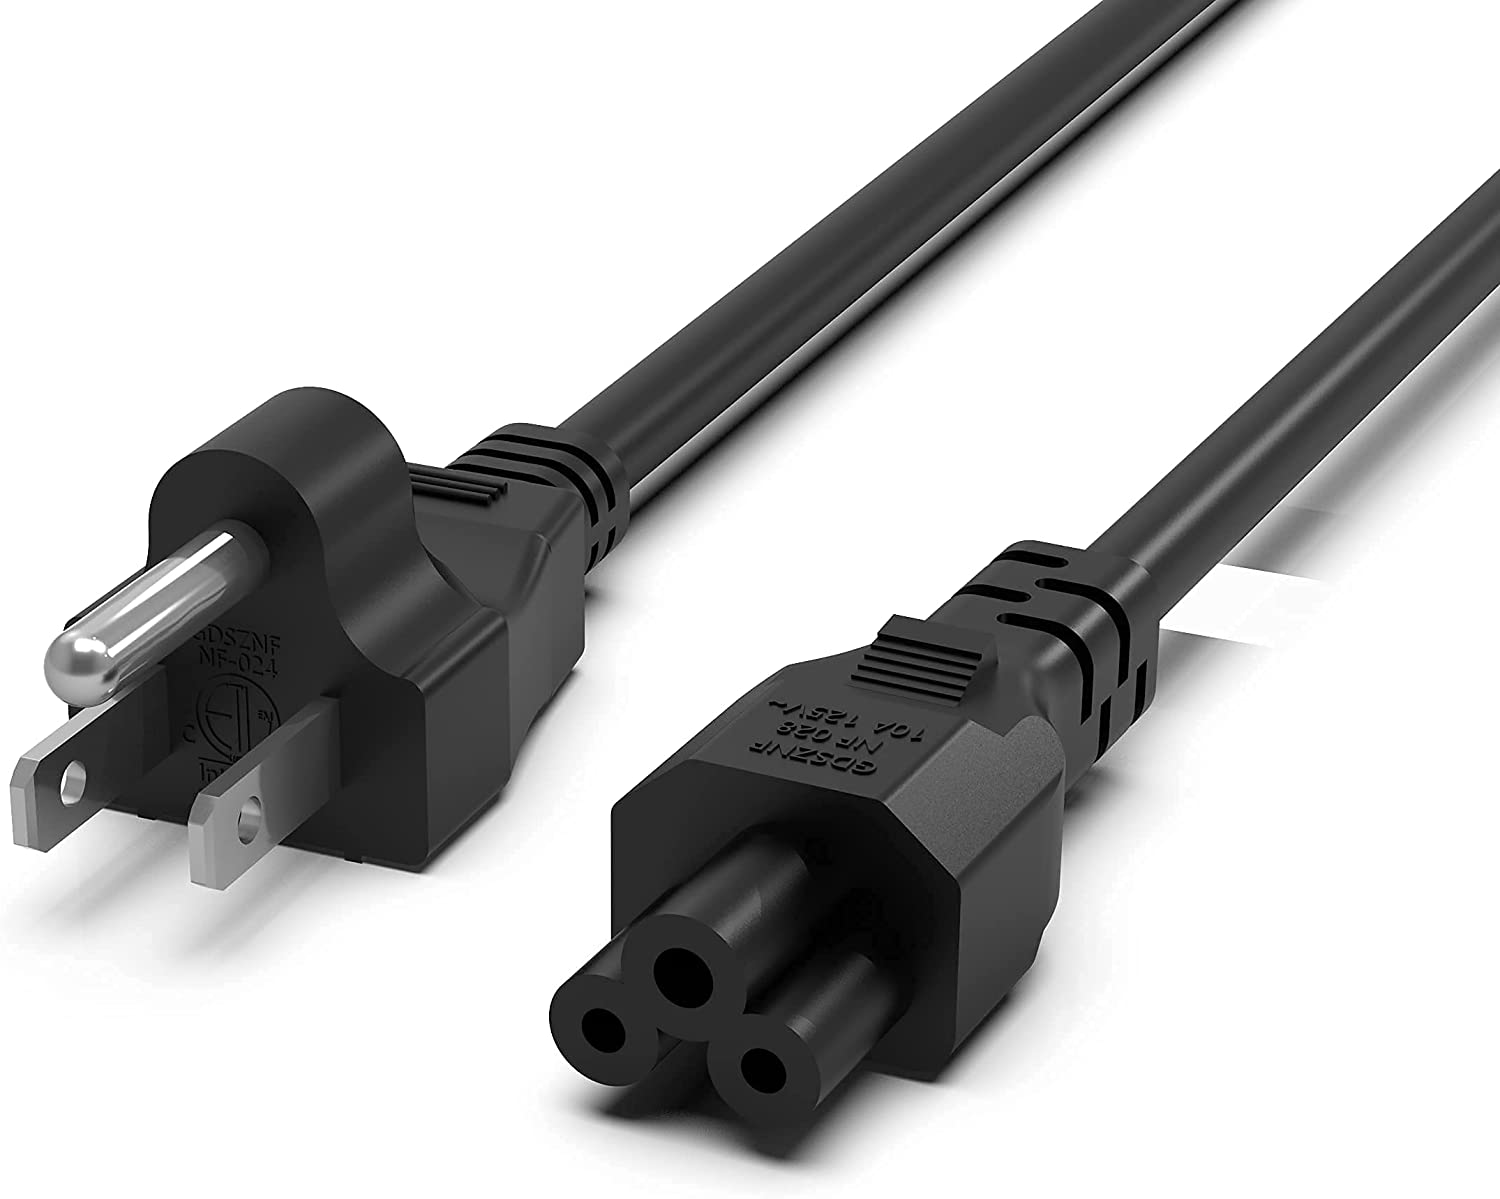 3 Core Notebook/Appliance Power Cord, 2m, 240V AC Wall to Appliance